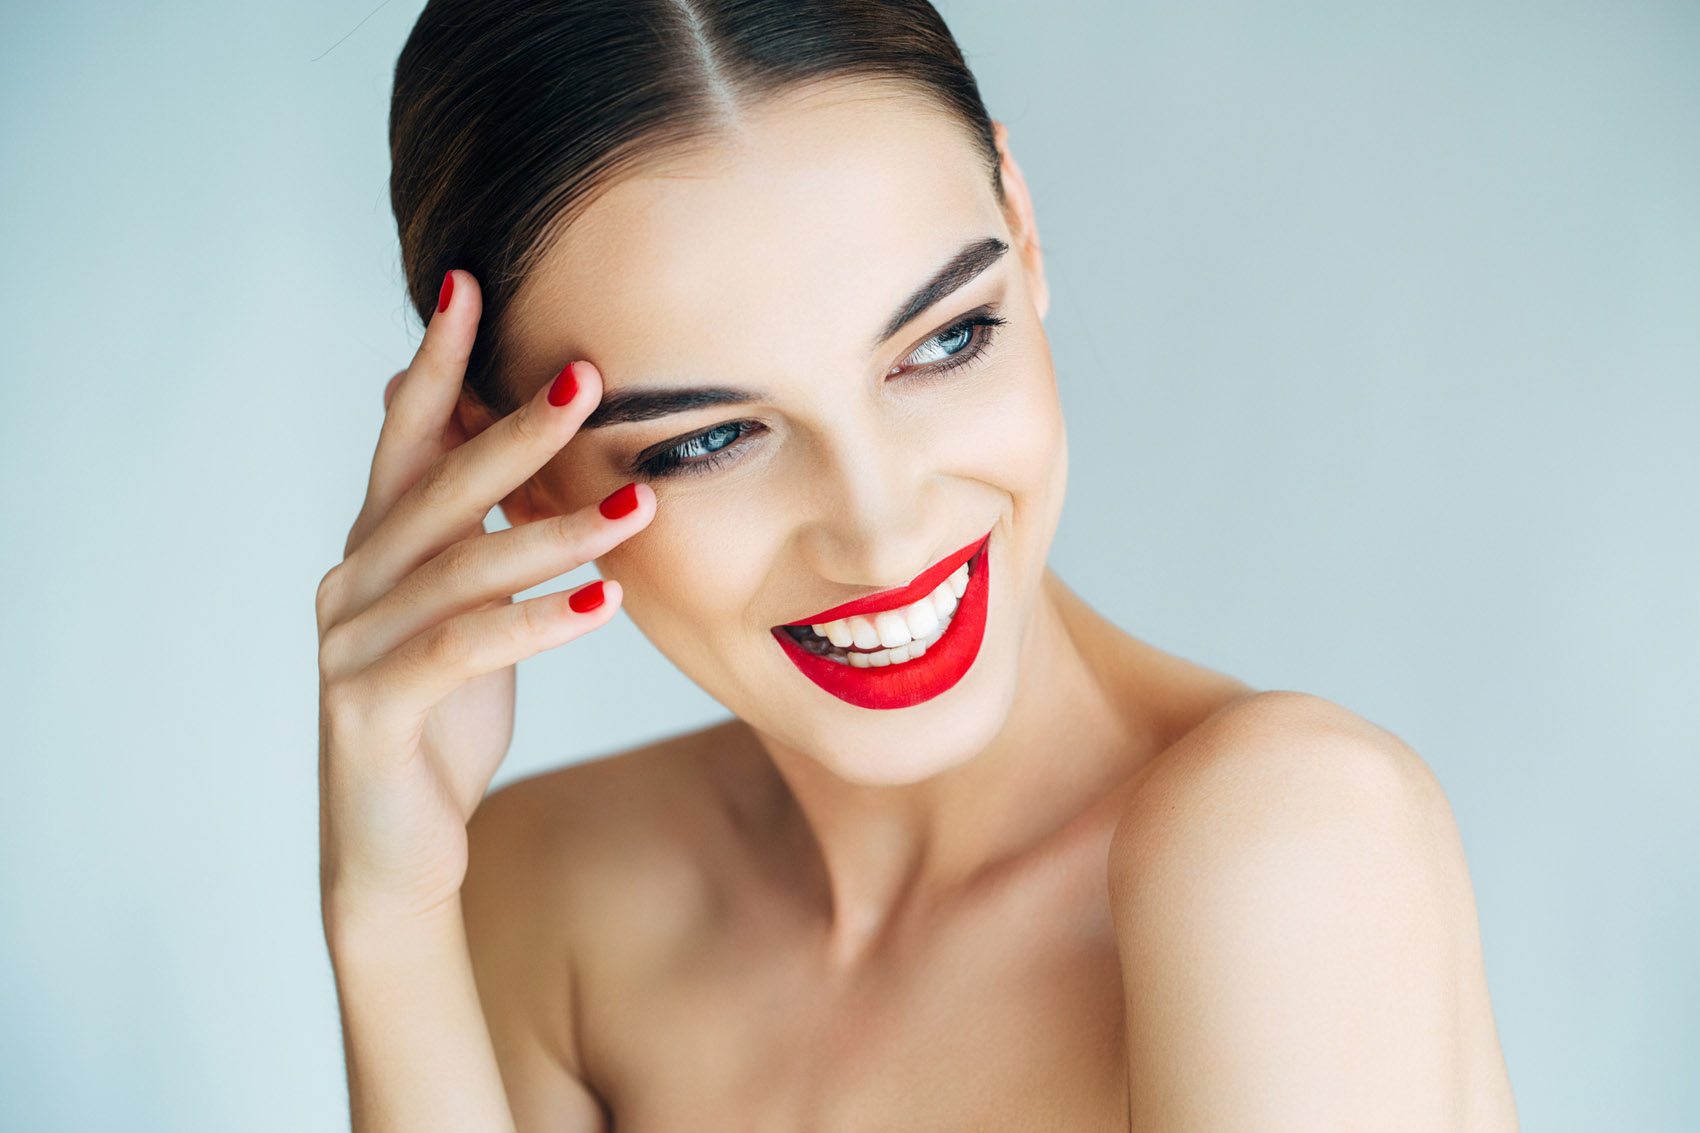 Red lipstick: how to choose the right shade for yourself